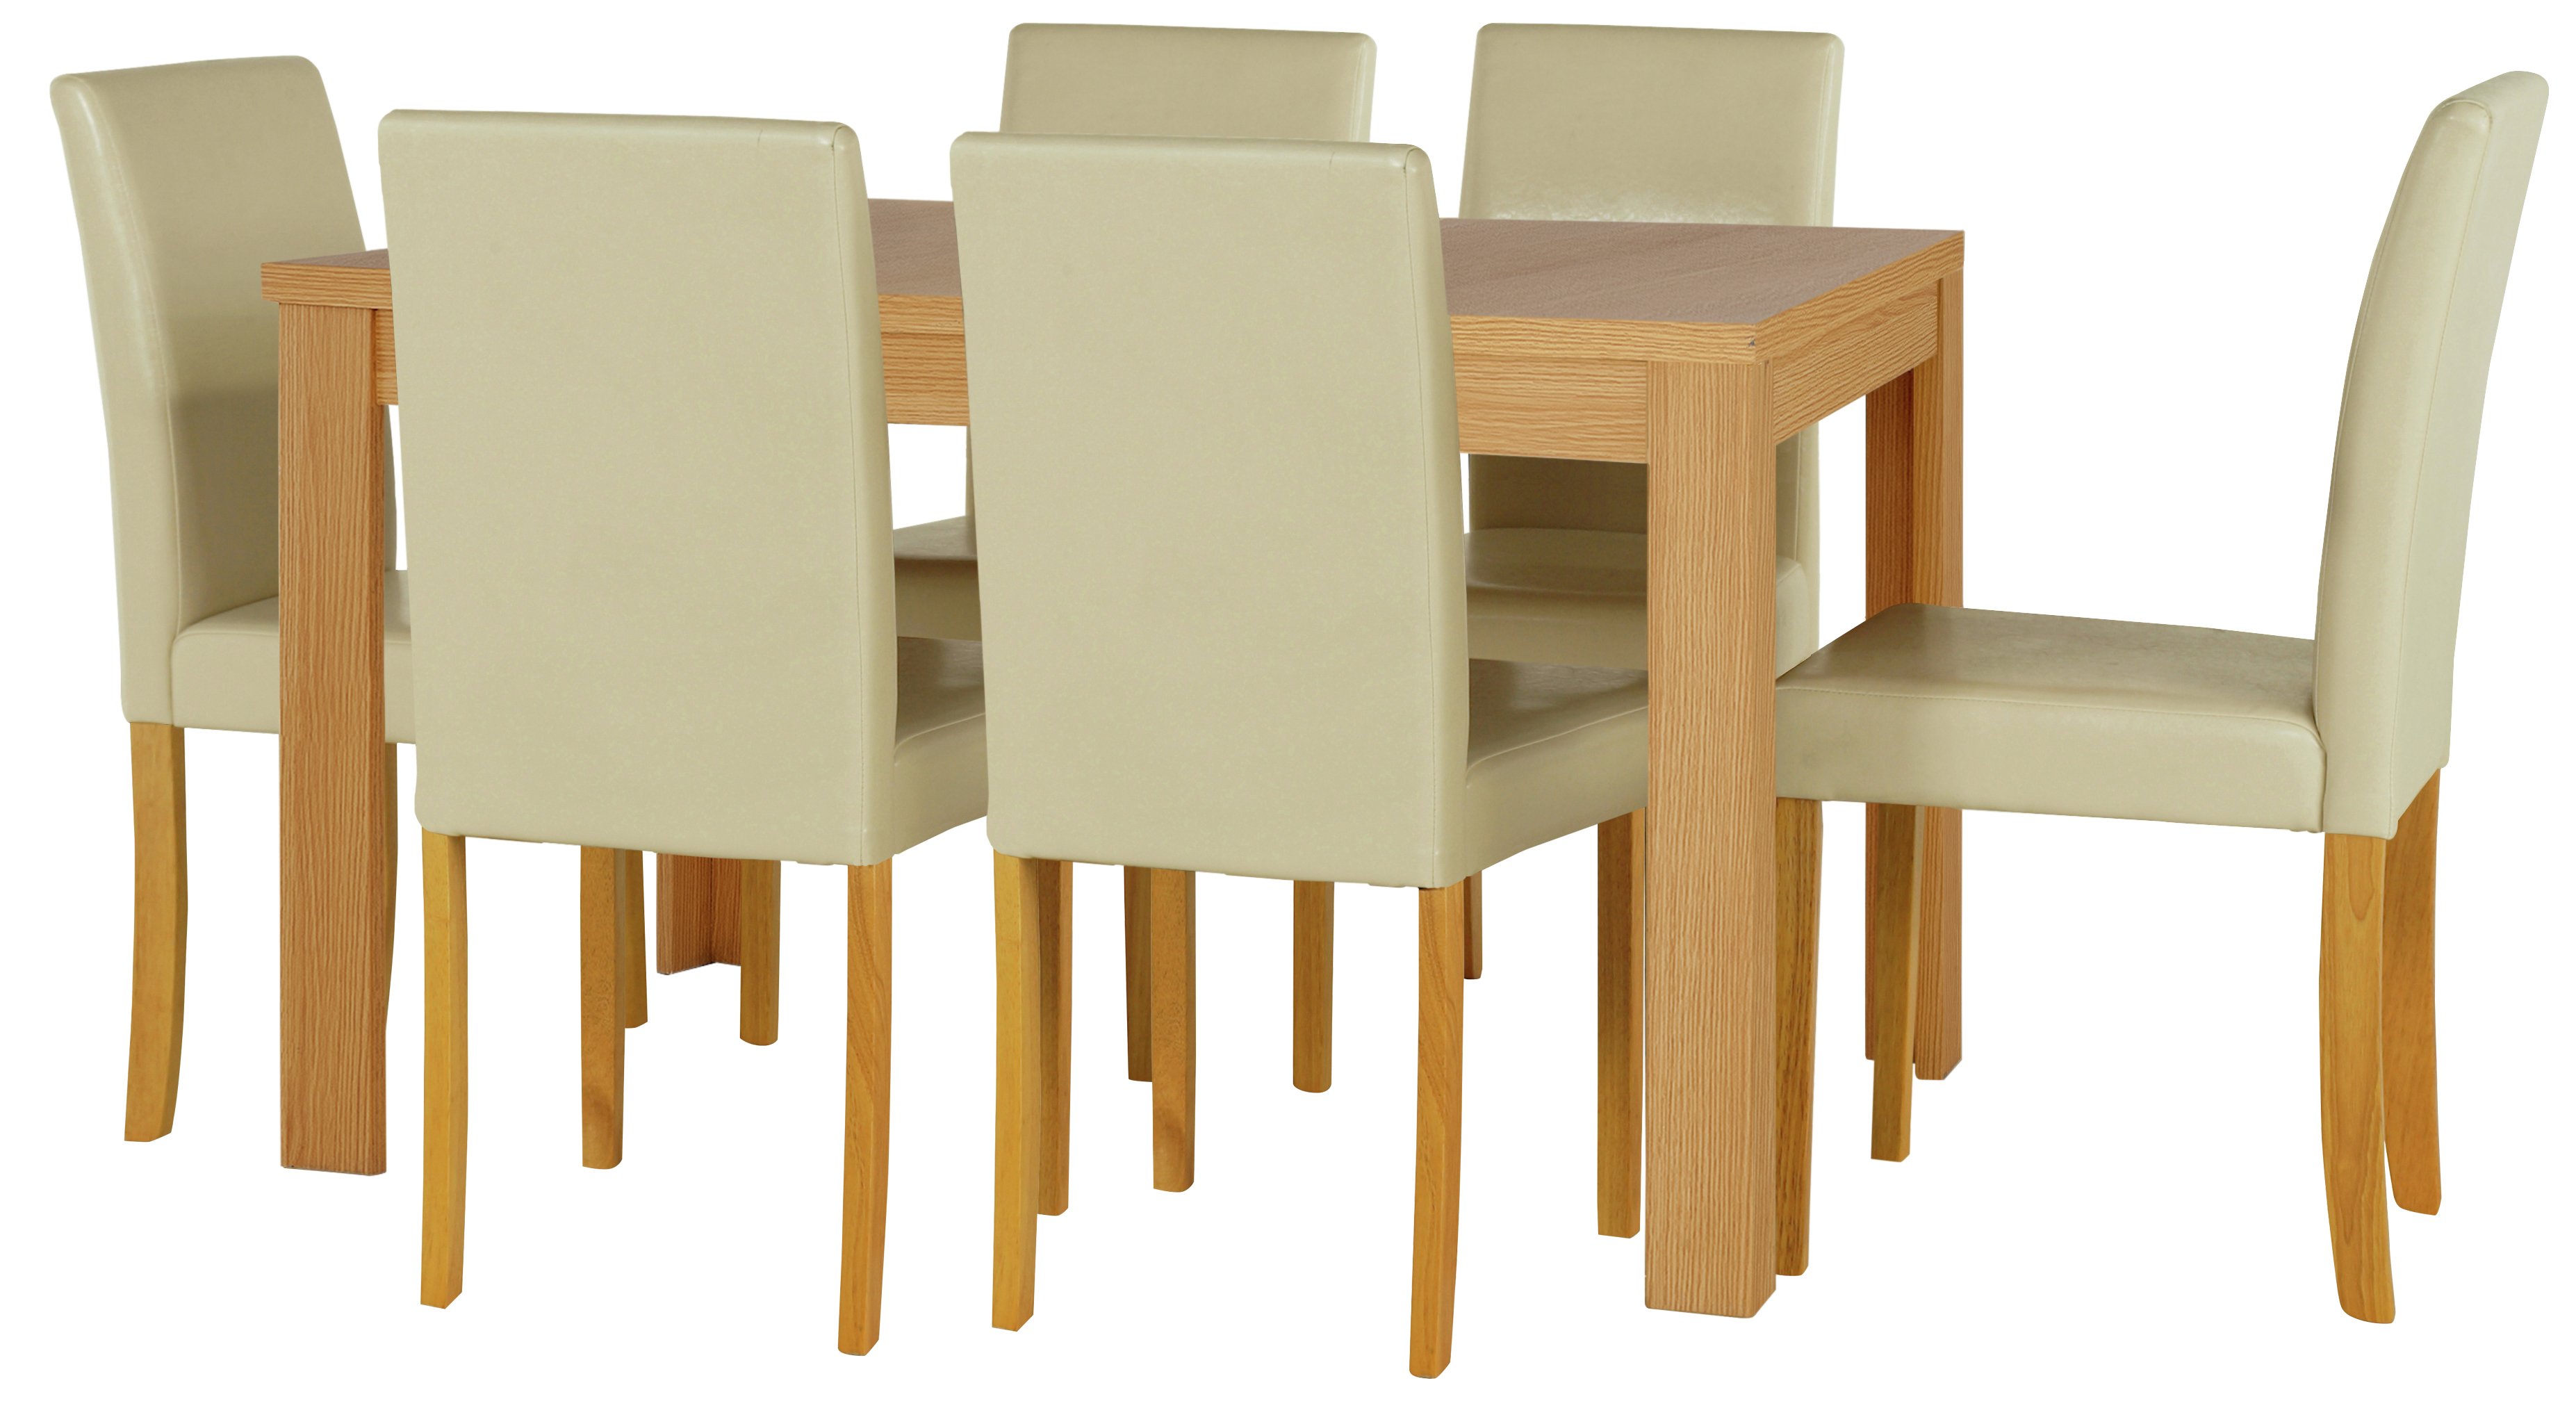 Review of HOME Penley Oak Veneer Ext Dining Table & 6 Chairs - Cream